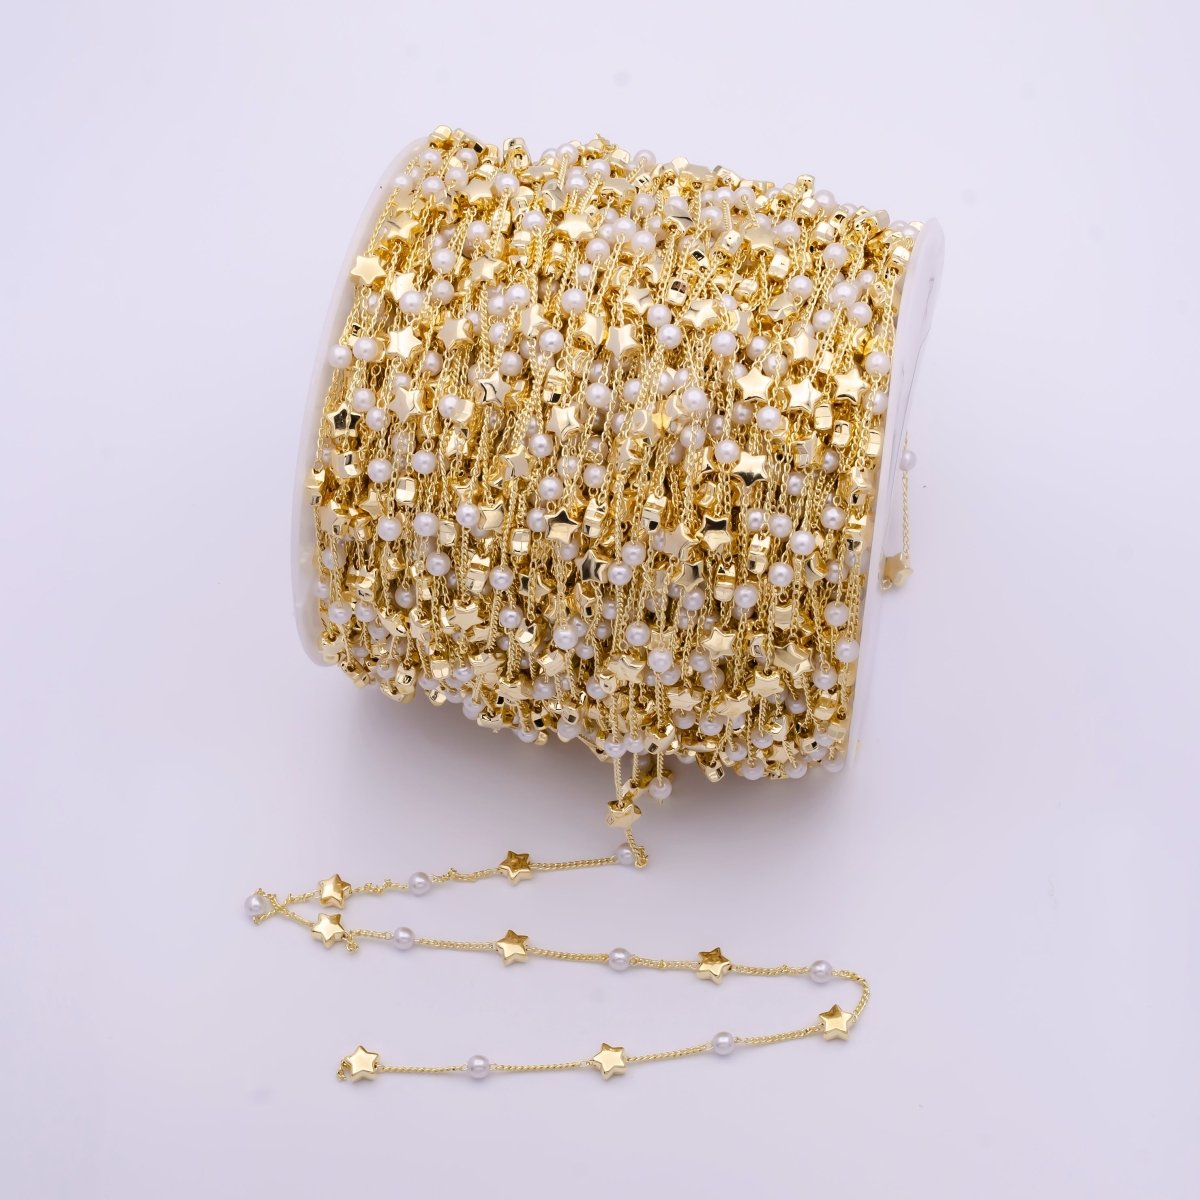 Gold Satellite Pearl & Celestial Star Bead Chain Wholesale by Yard For DIY Jewelry Making Component | ROLL-826 Clearance Pricing - DLUXCA